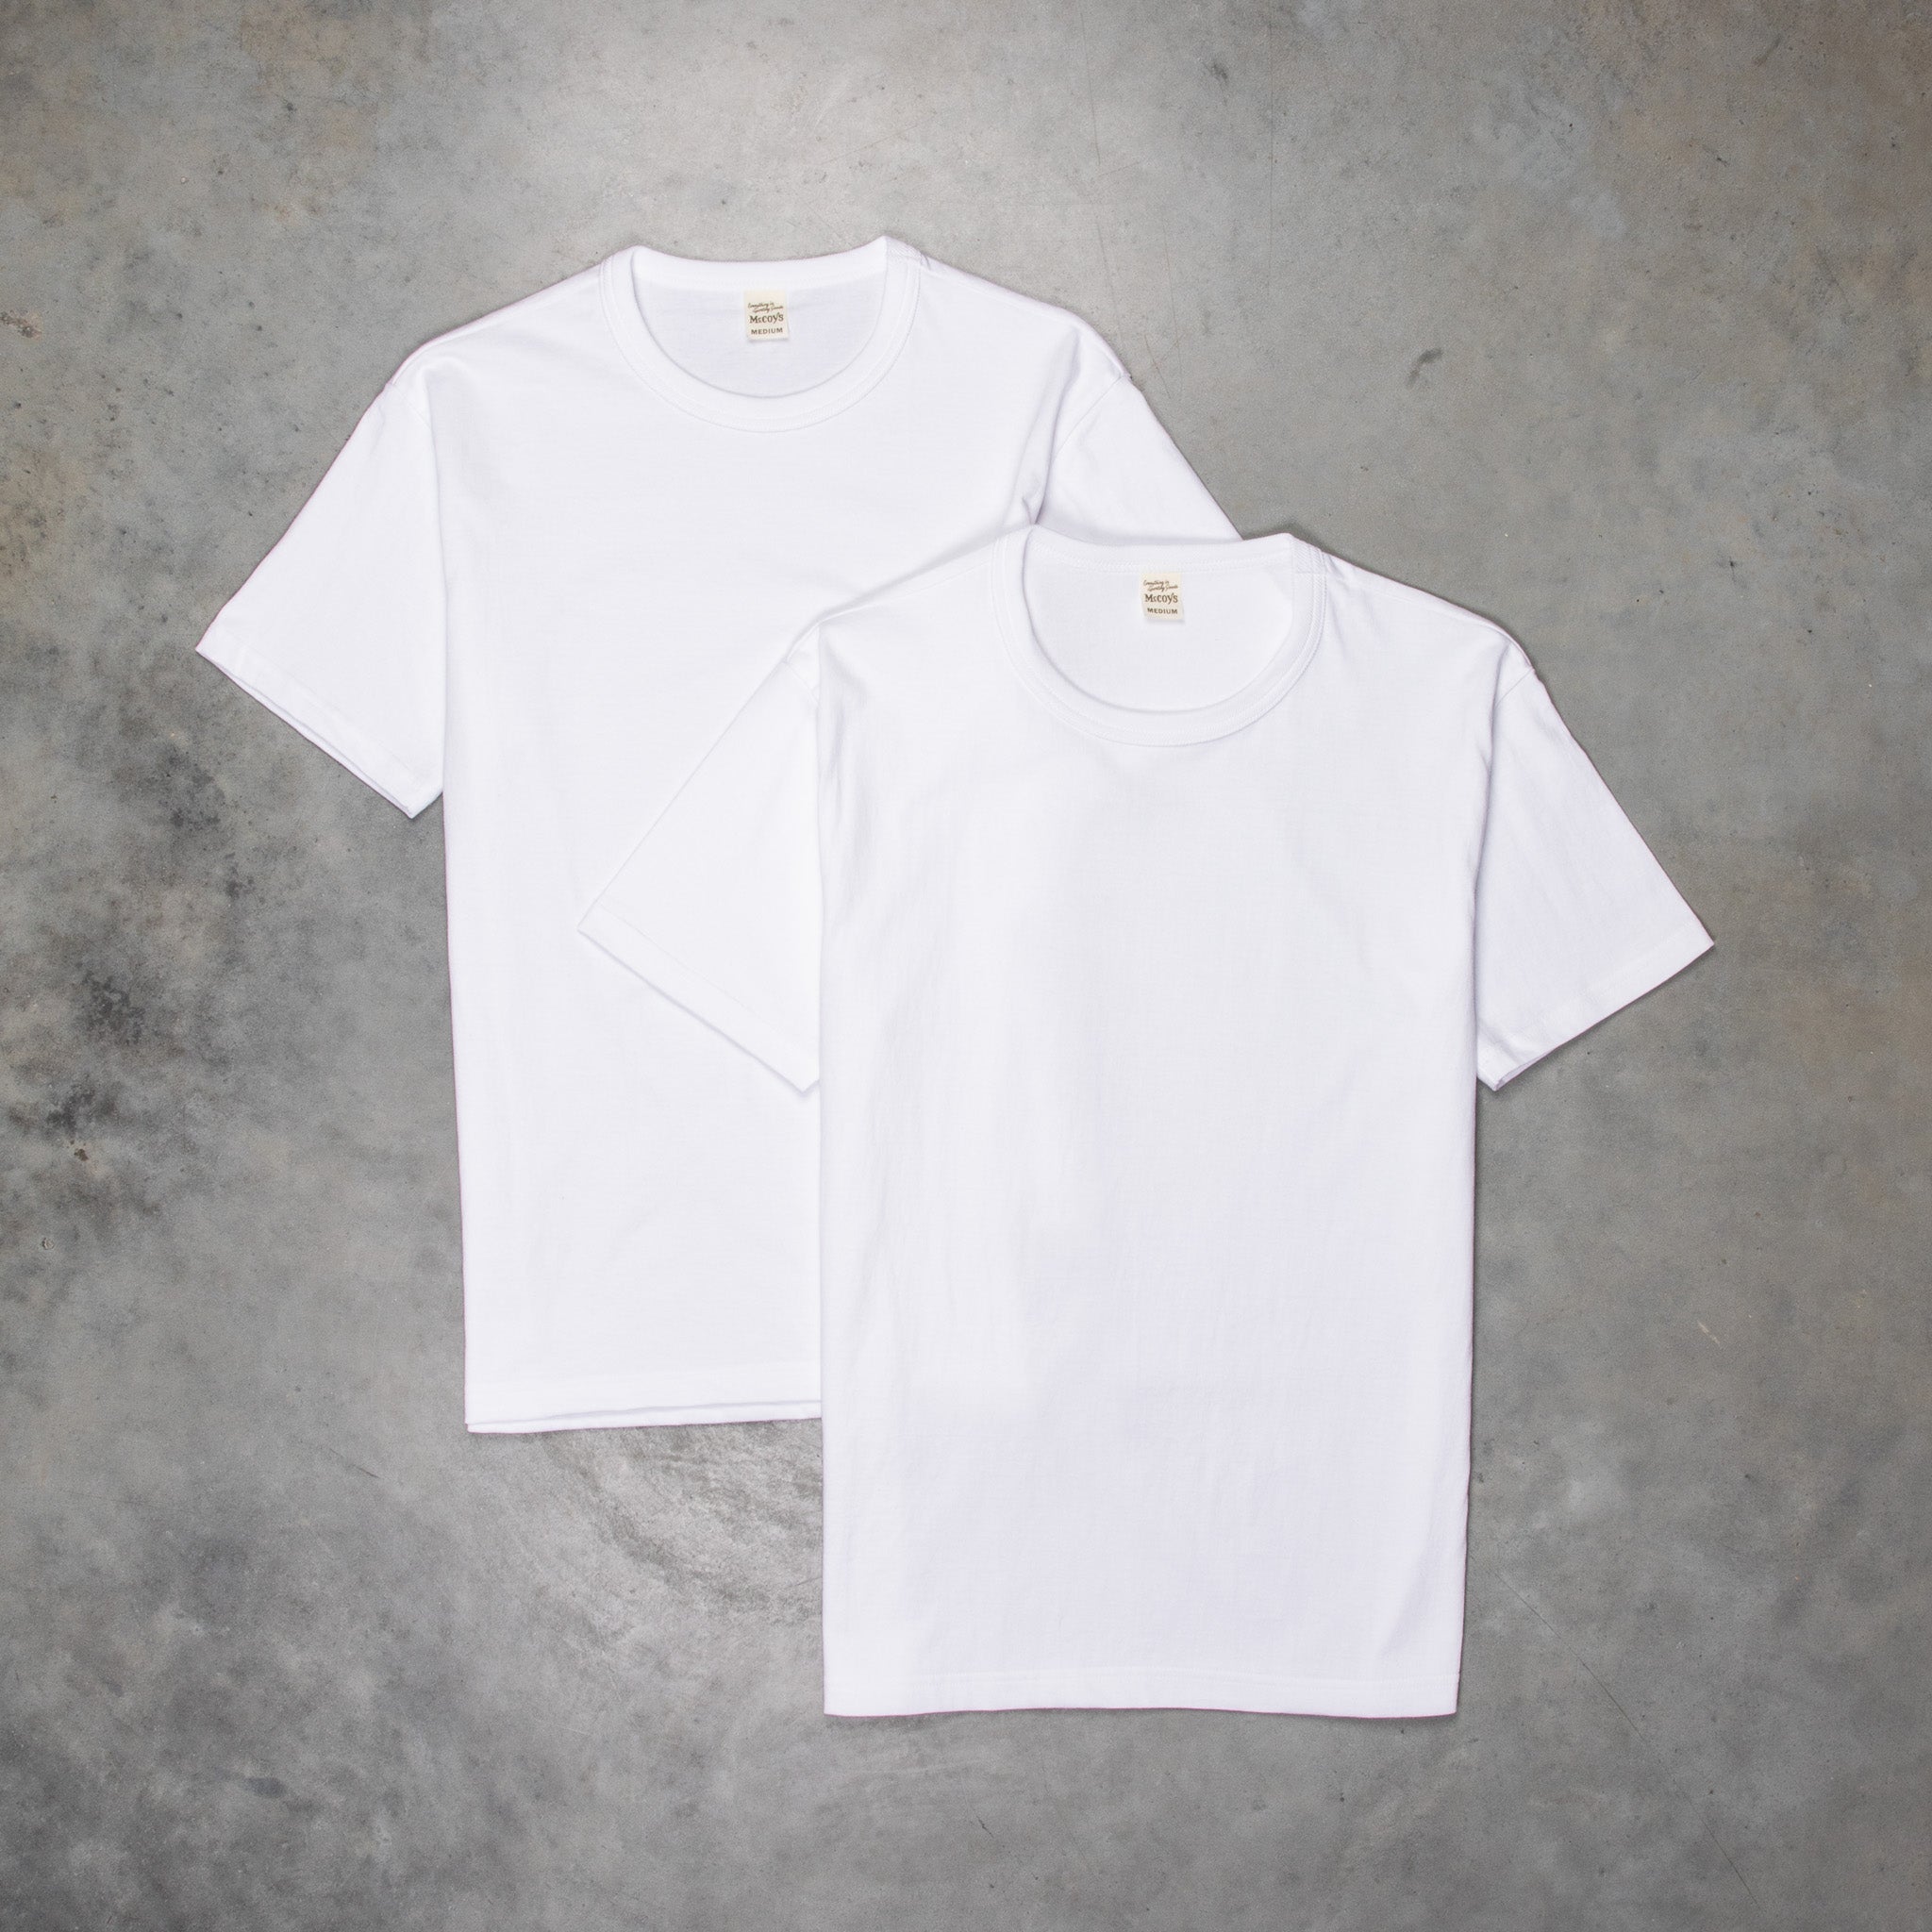 Real McCoy's 2 pack crew neck tee white – Frans Boone Store